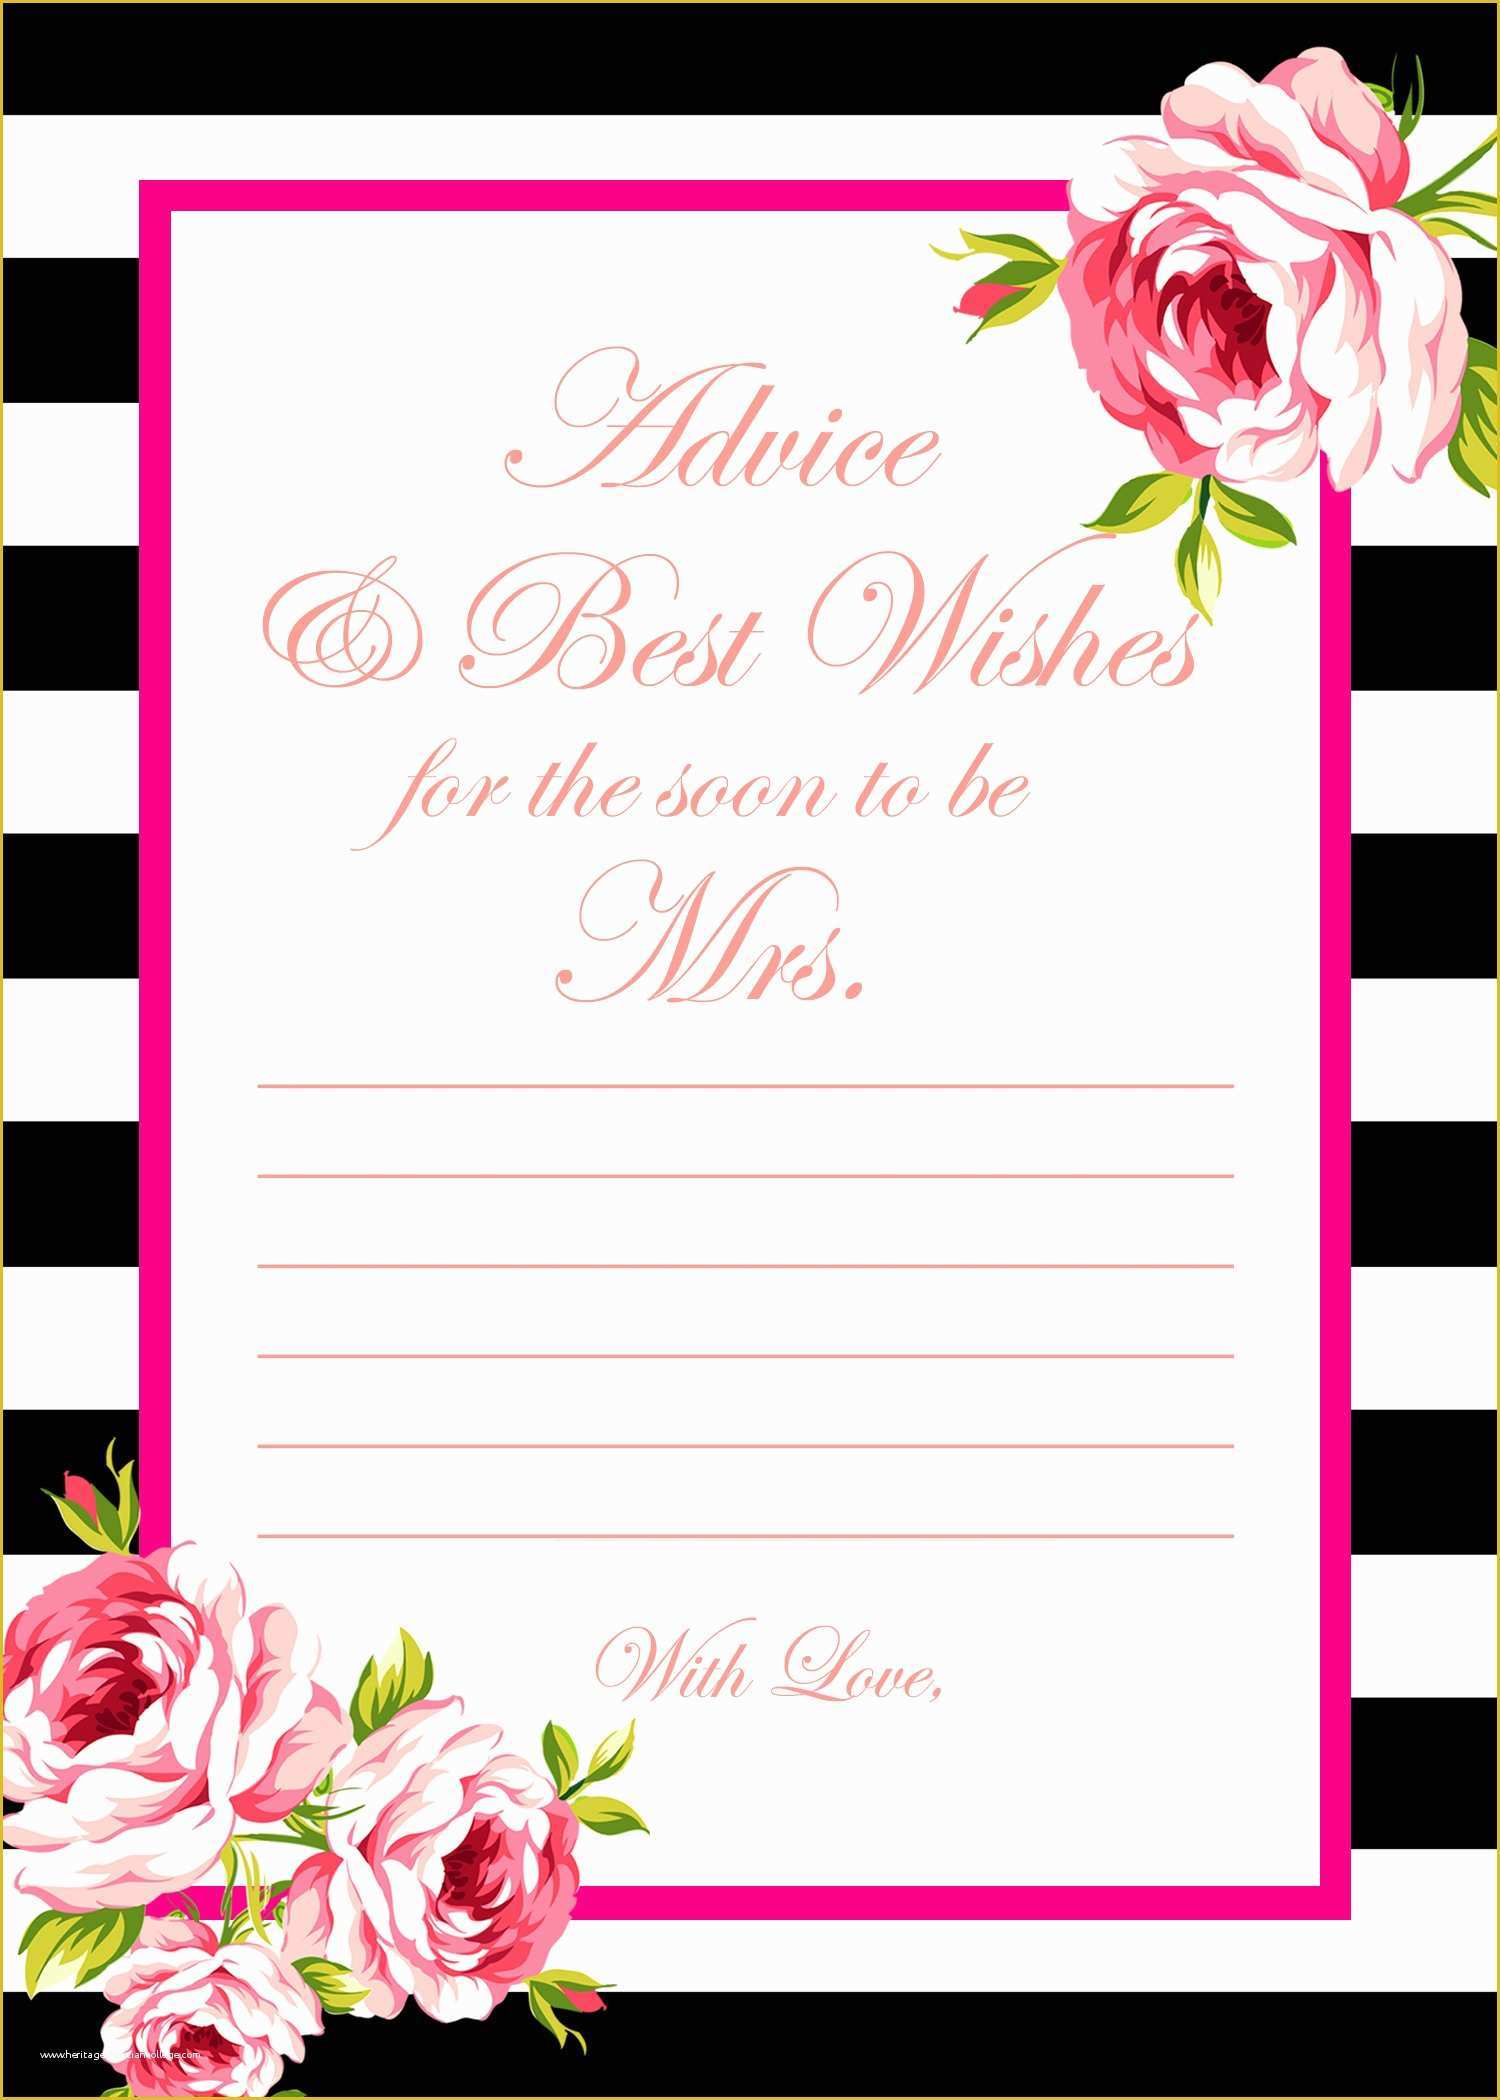 Free Bridal Shower Templates Of 2 Free Printable Games Archives Bridal Shower Ideas themes